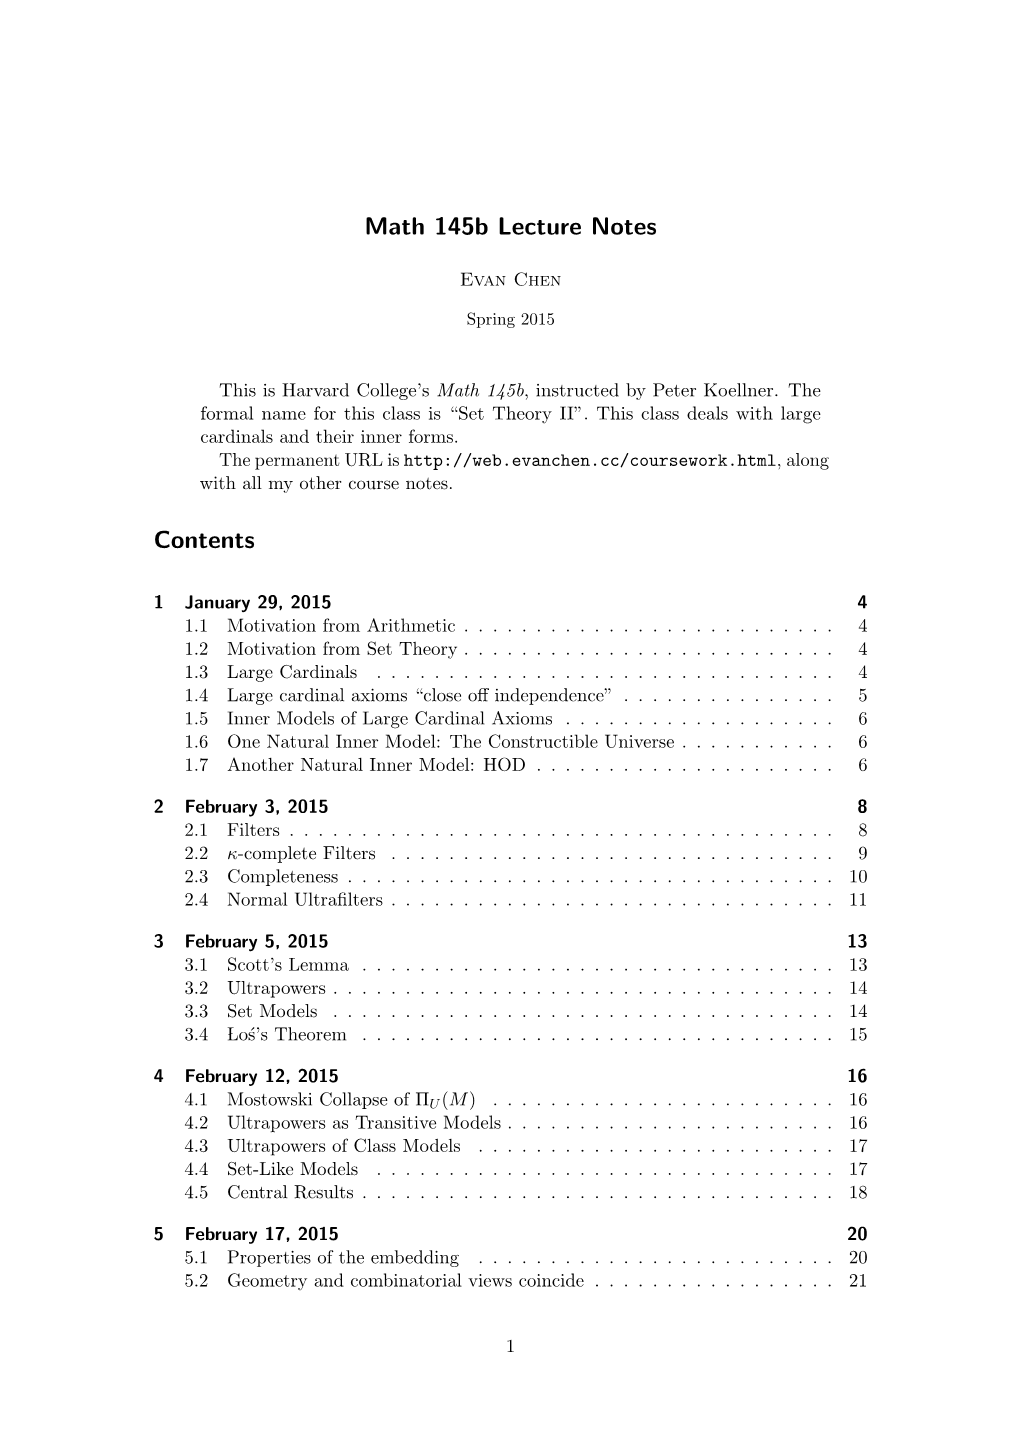 Math 145B Lecture Notes Contents